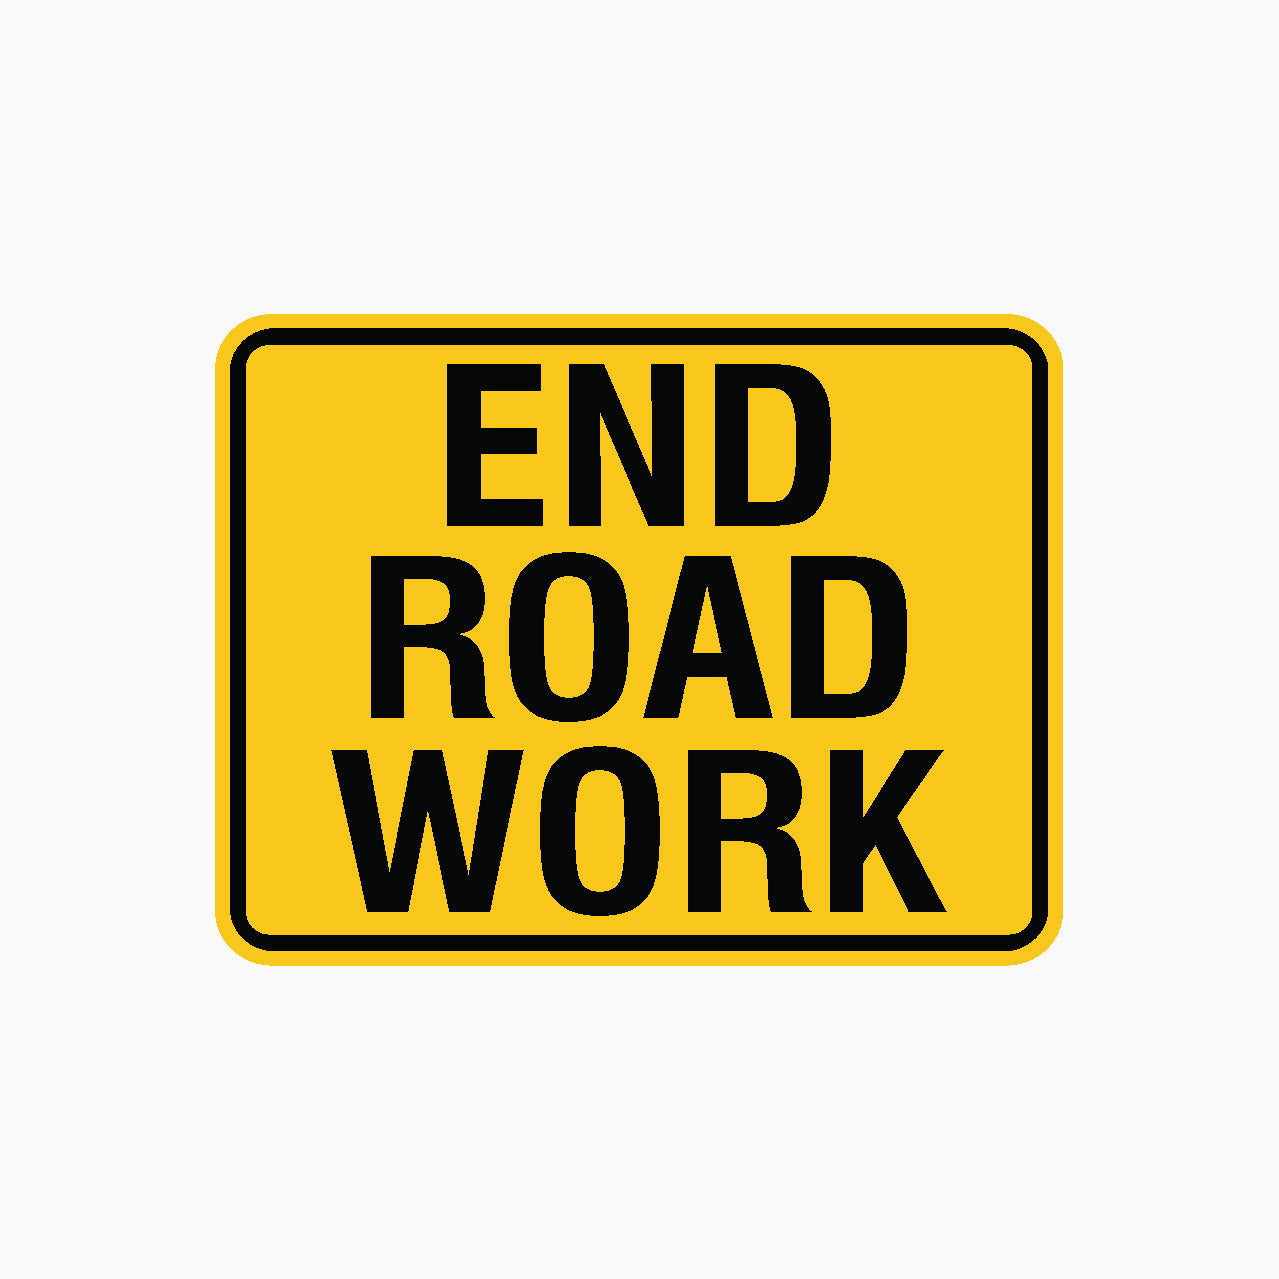 END ROAD WORK SIGN - traffic and road signs